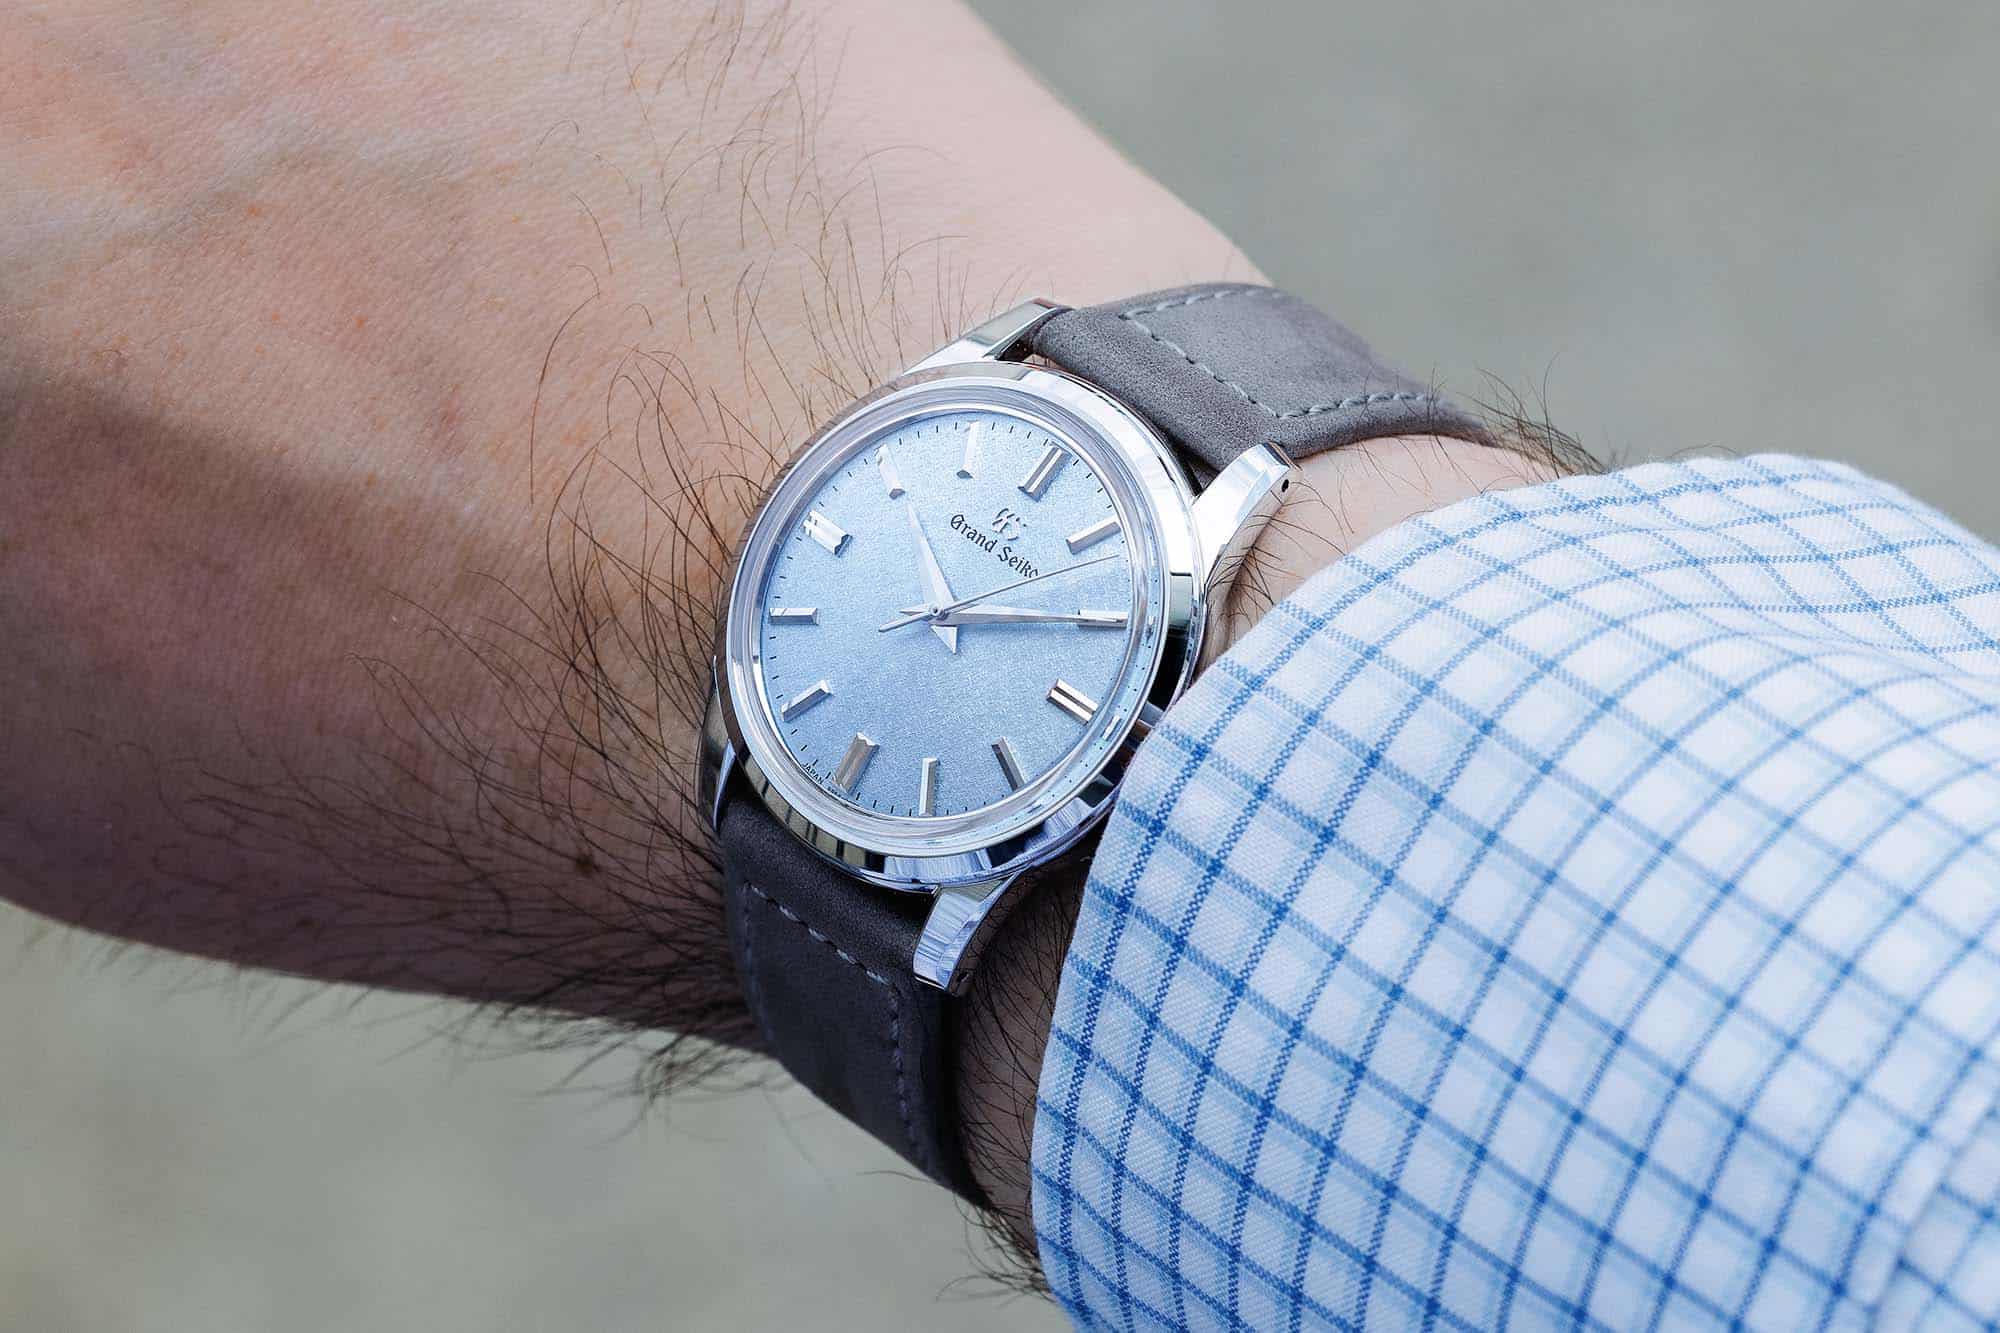 Video] What's So Special About Grand Seiko's 37mm Dress Watch? - Worn &  Wound